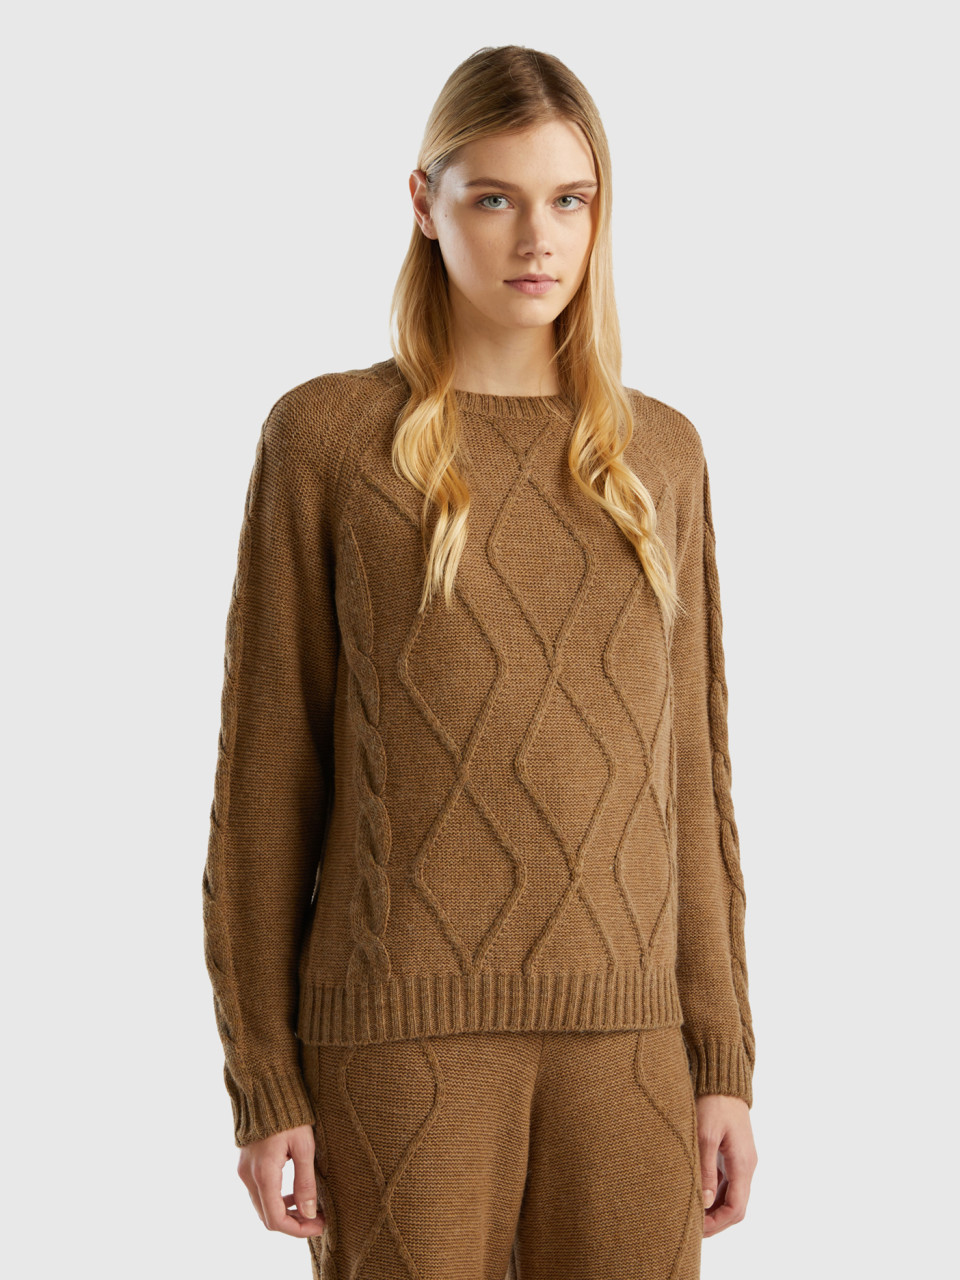 Benetton, Sweater With Cables And Diamonds, Camel, Women